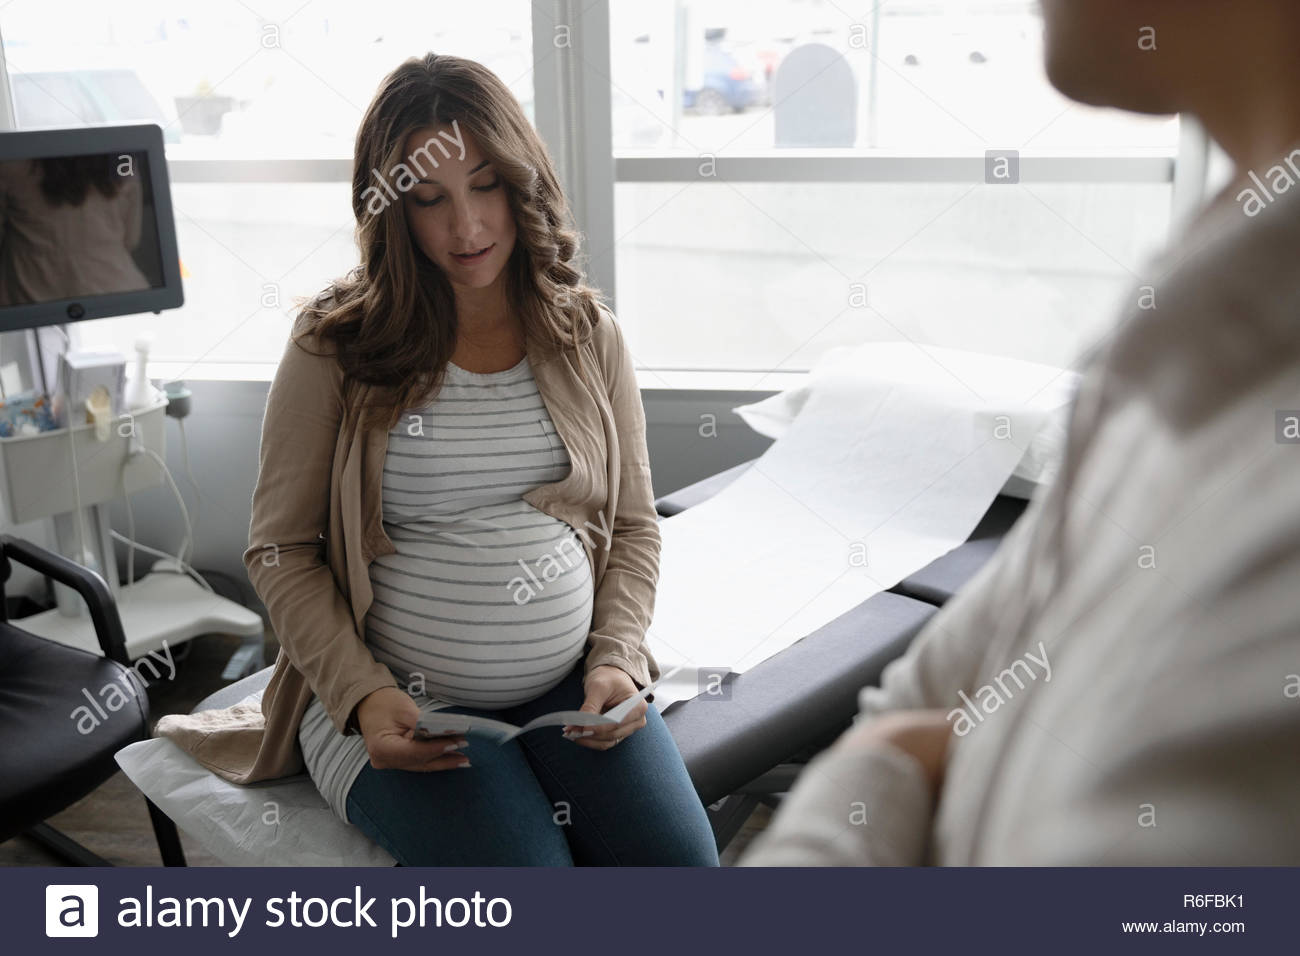 Pregnant woman reviewing brochure in clinic examination room Stock Photo